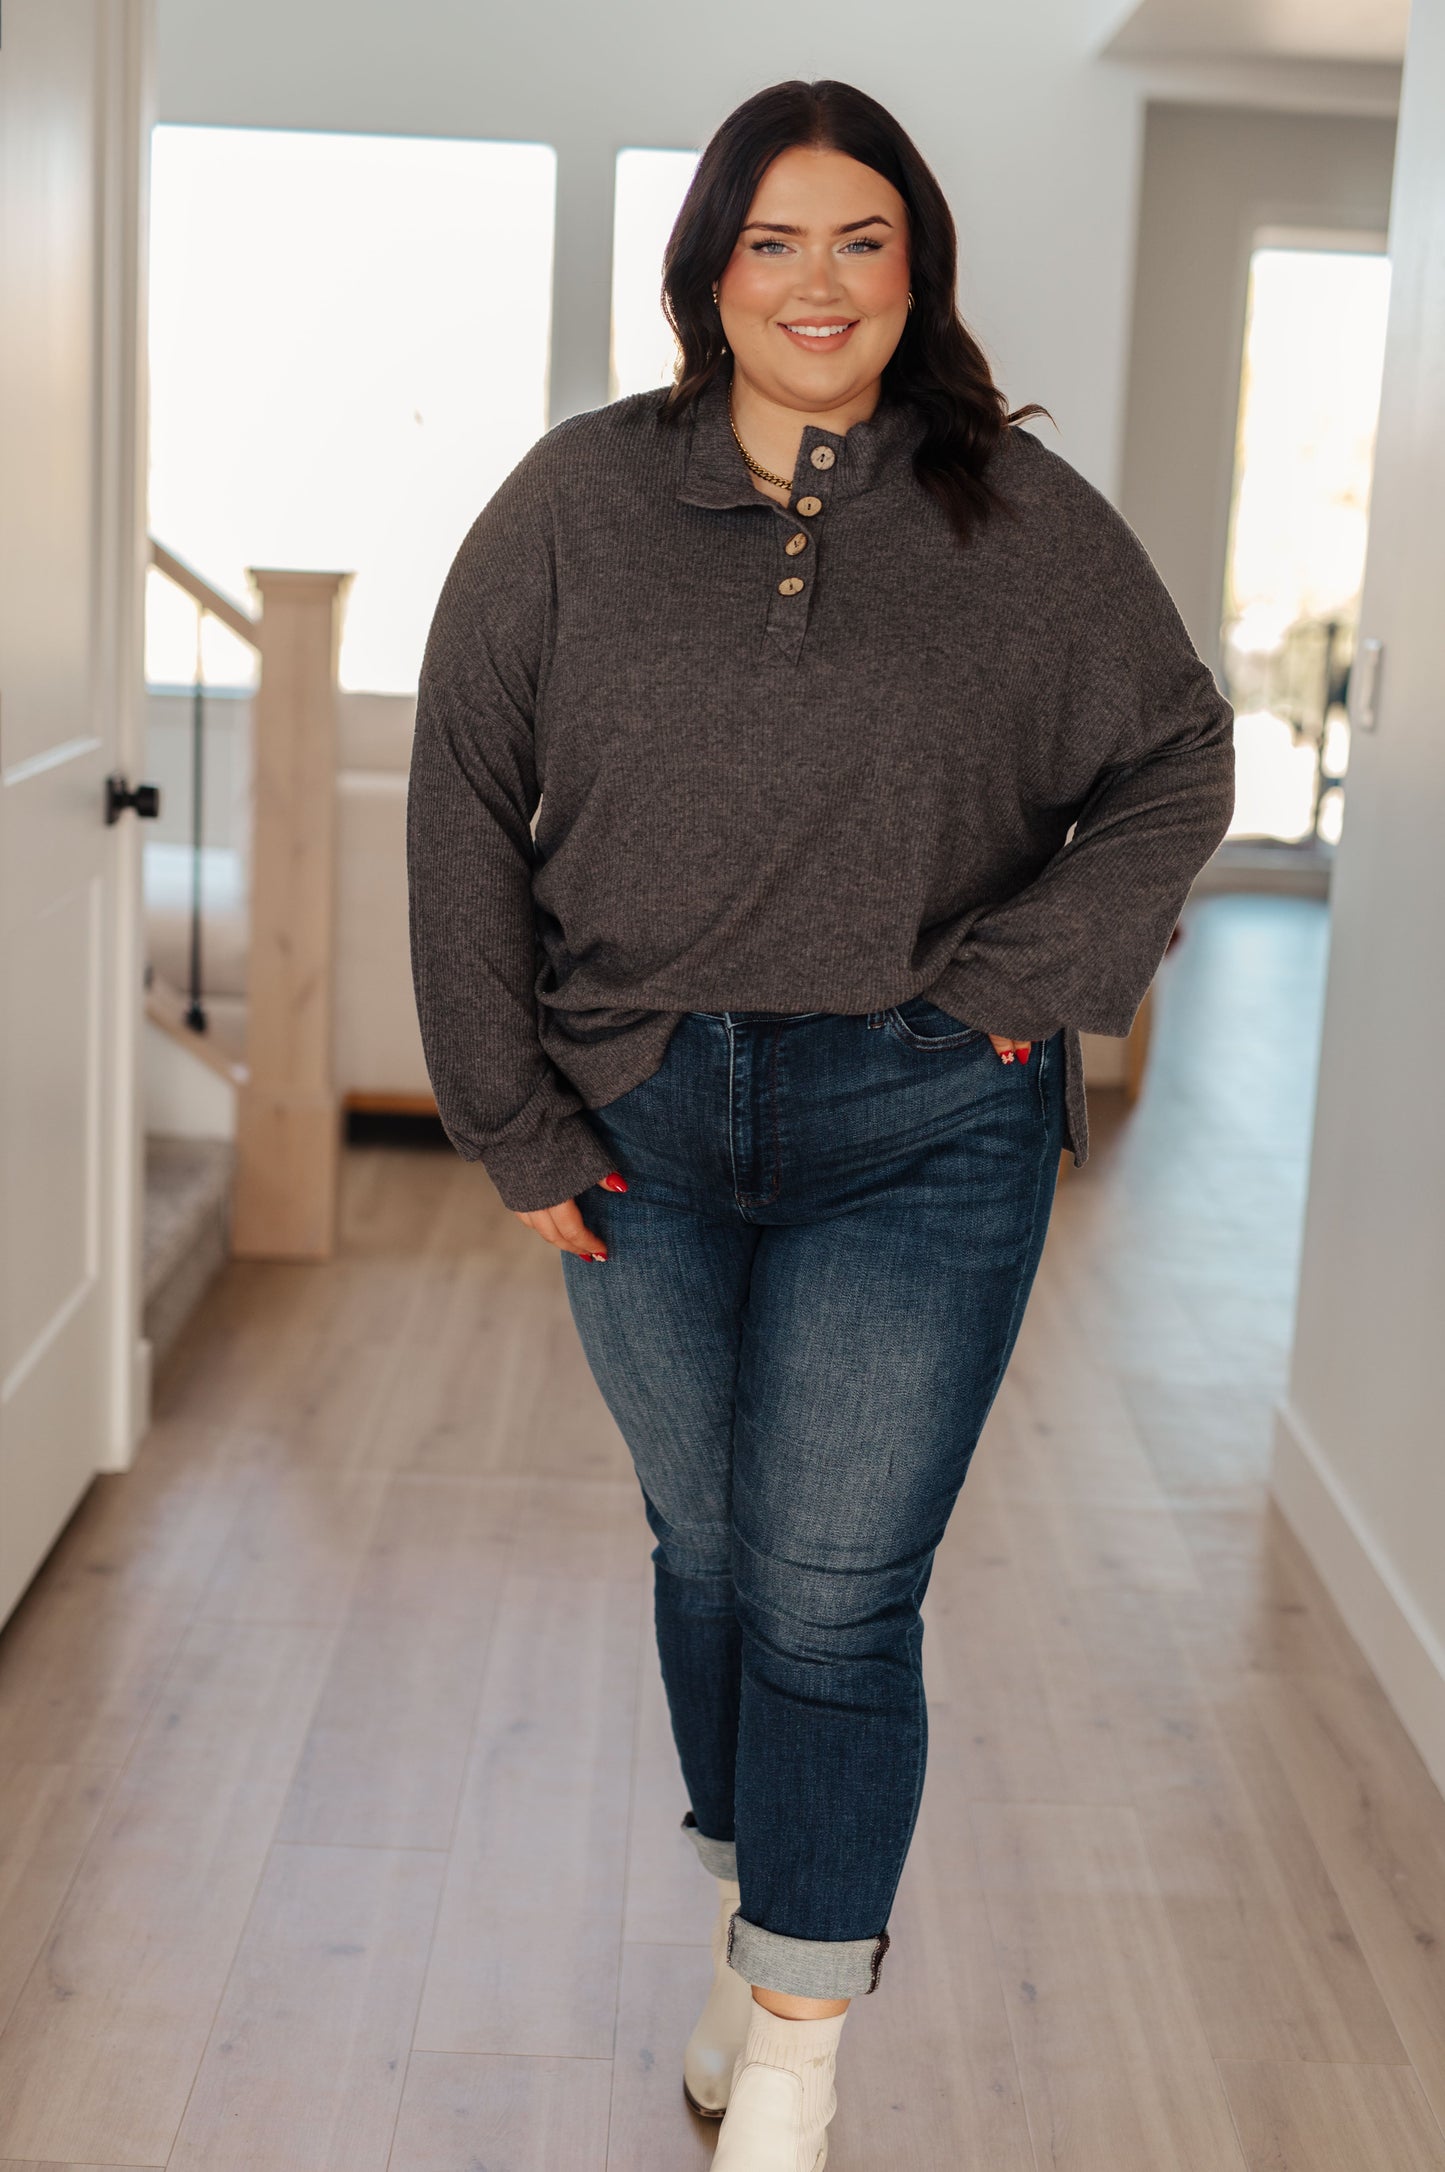 Feel warmth and comfort with this Cozy All Over Henley Top! It features a mock neckline, functional buttons, brushed ribbed knit and dropped shoulder - creating a timeless wardrobe staple. Soft to the touch and perfect for any occasion, this top will be a warm hug all year round! S - 3X